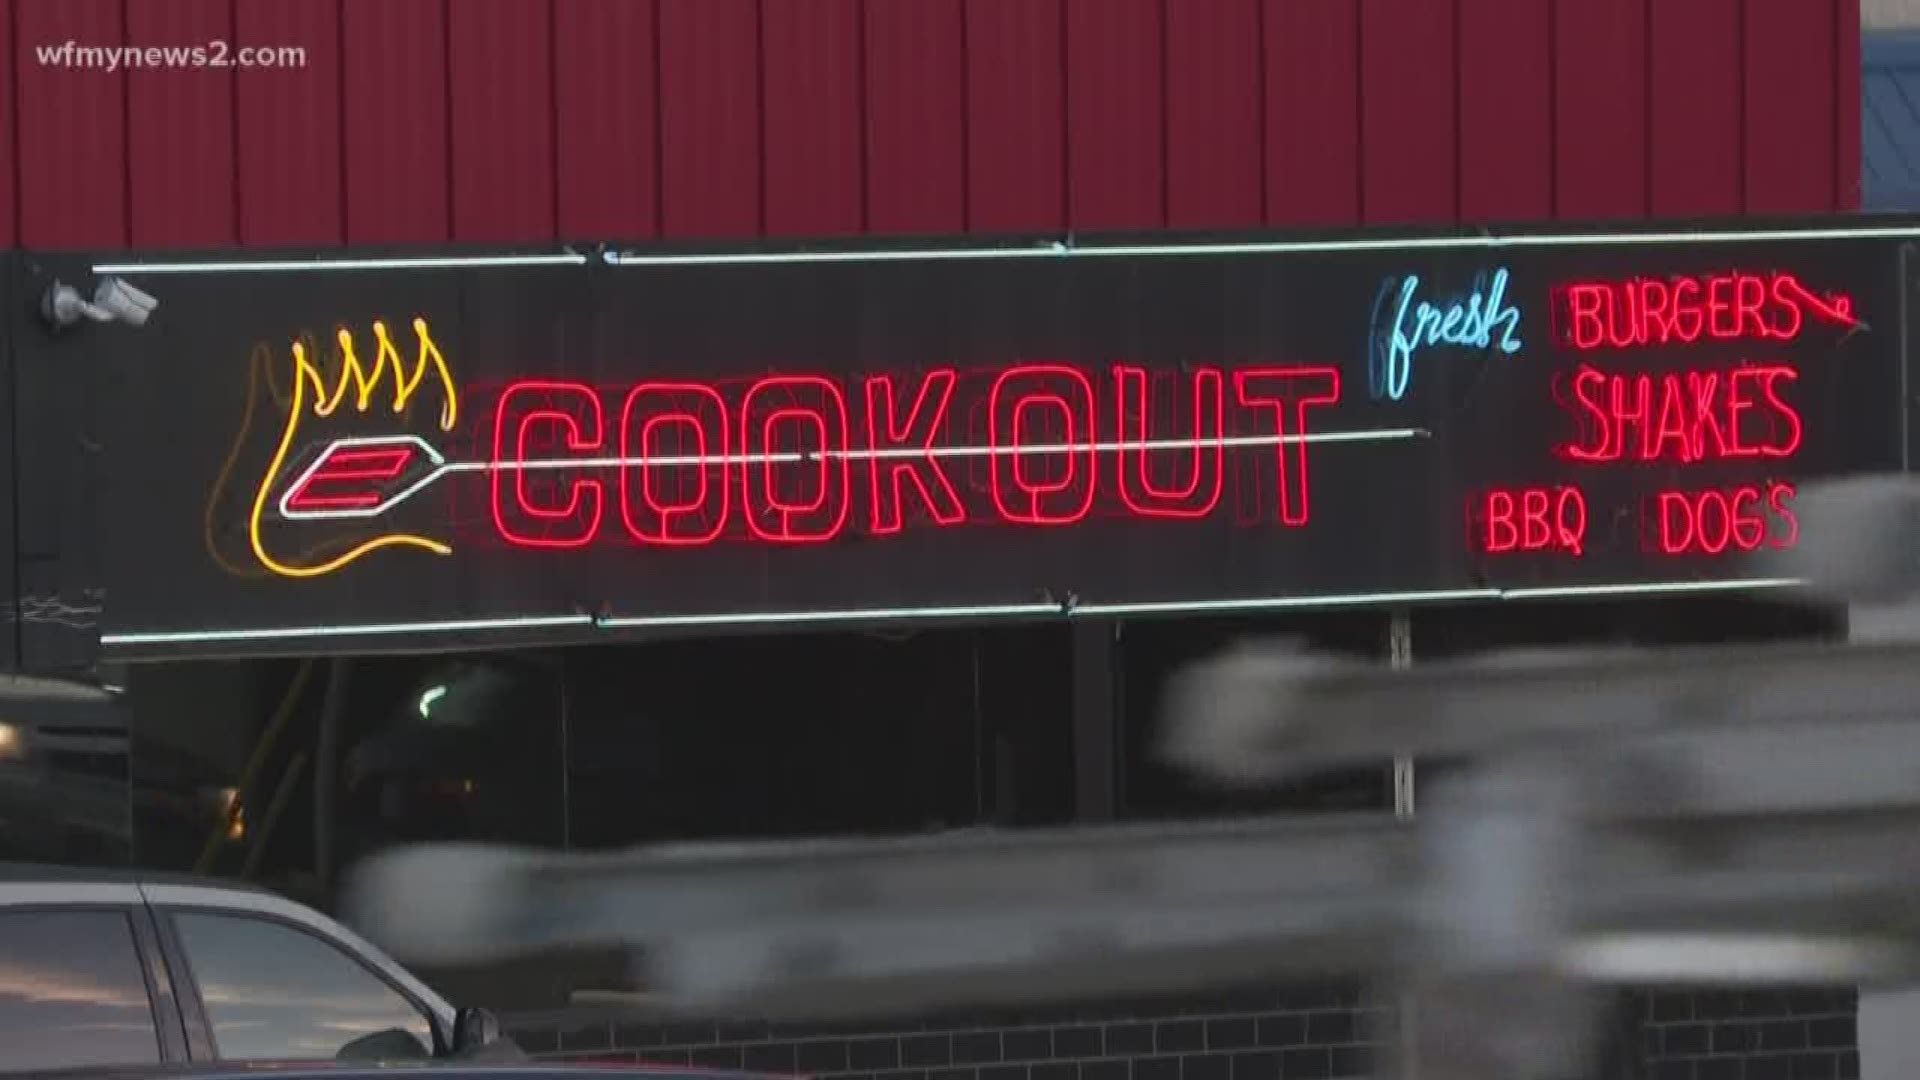 A nearby Cookout has received three notices of violations in the past, all for illegal dumping.